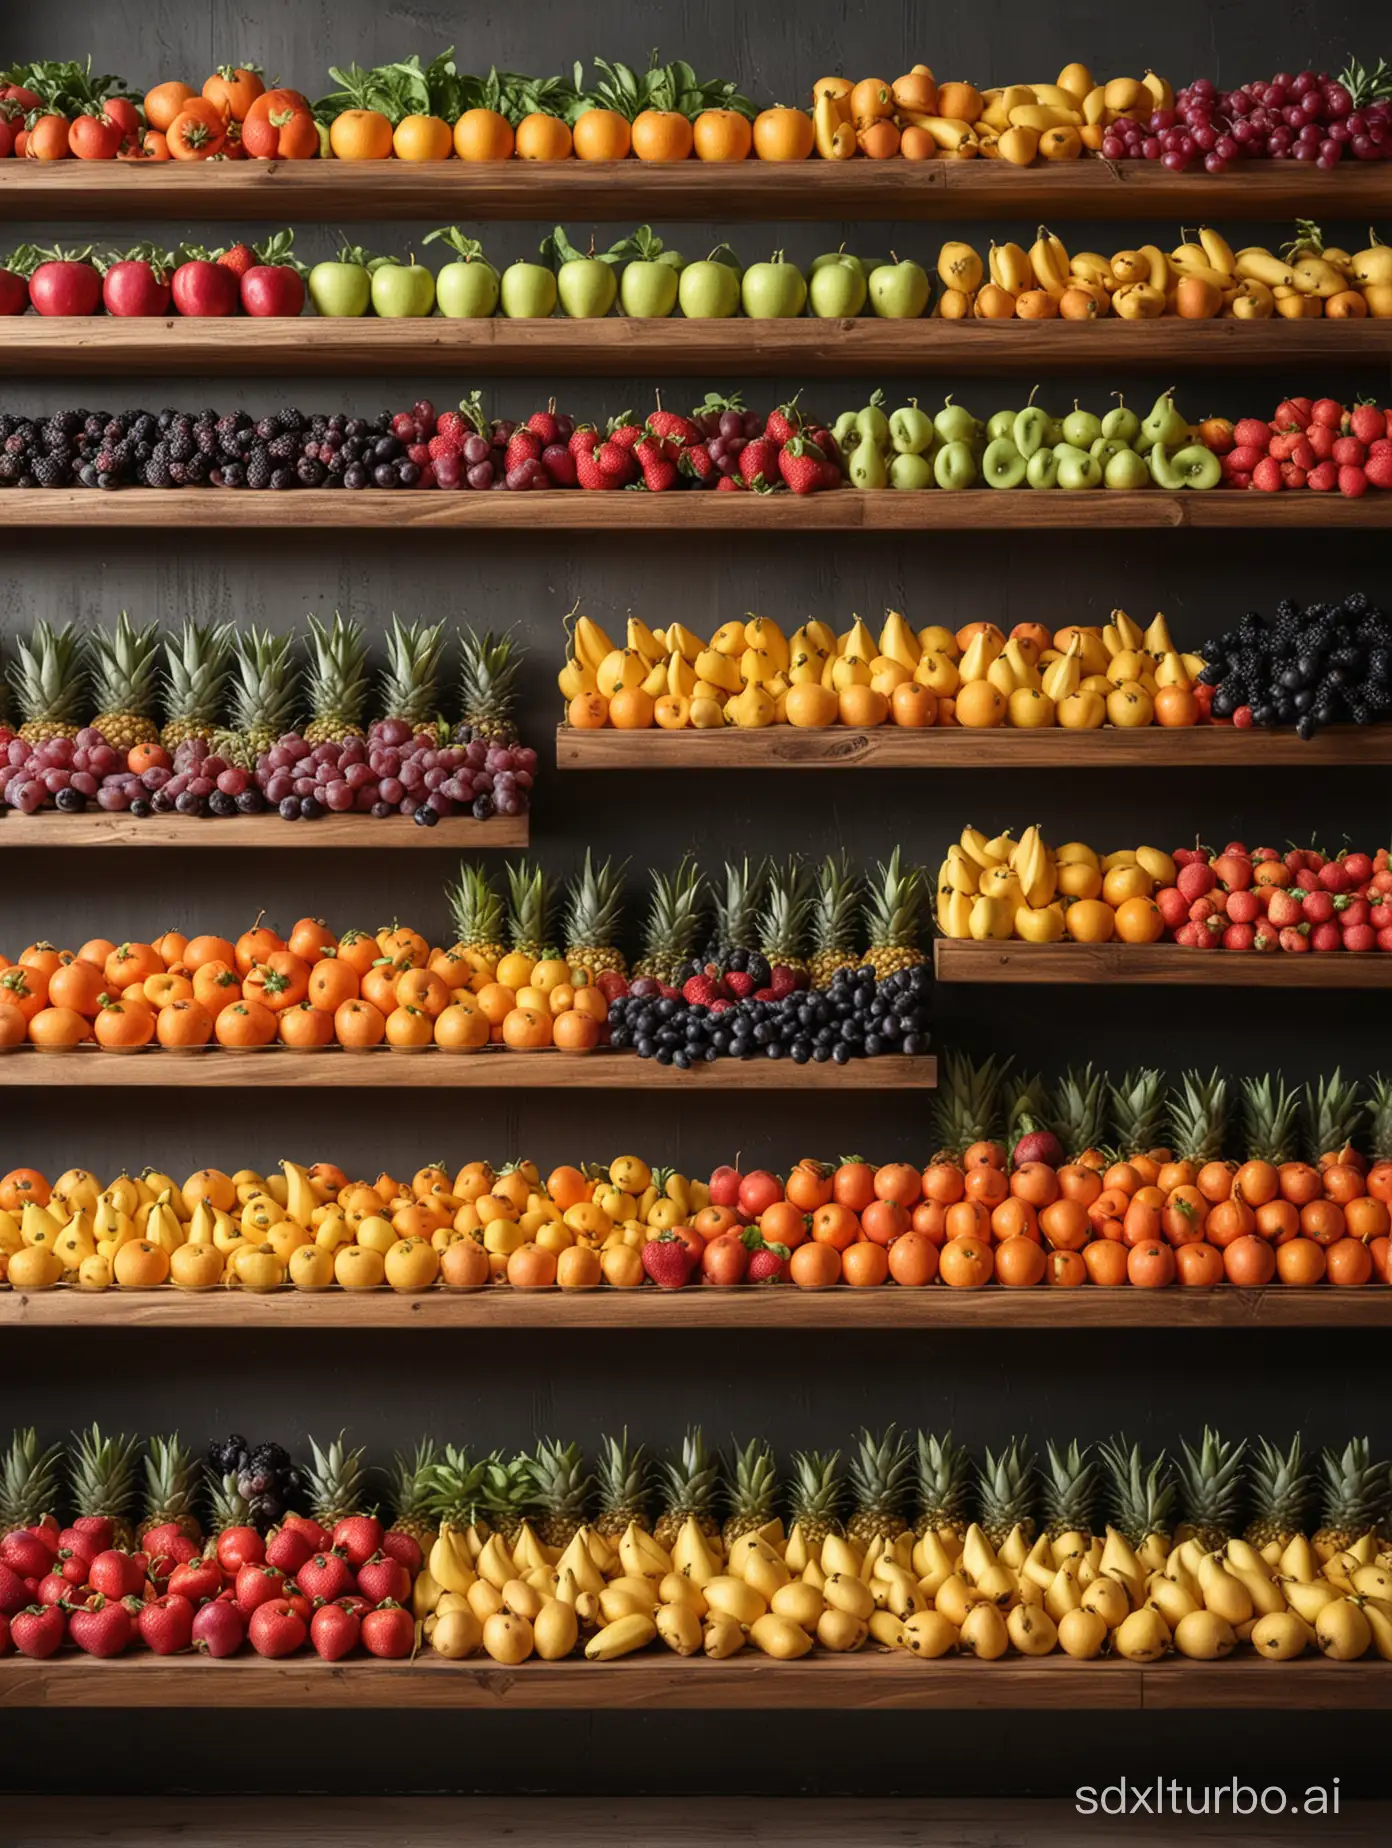 One wall is full of shelves, filled with all kinds of fruits, fresh and tempting. Realistic feeling camera shooting